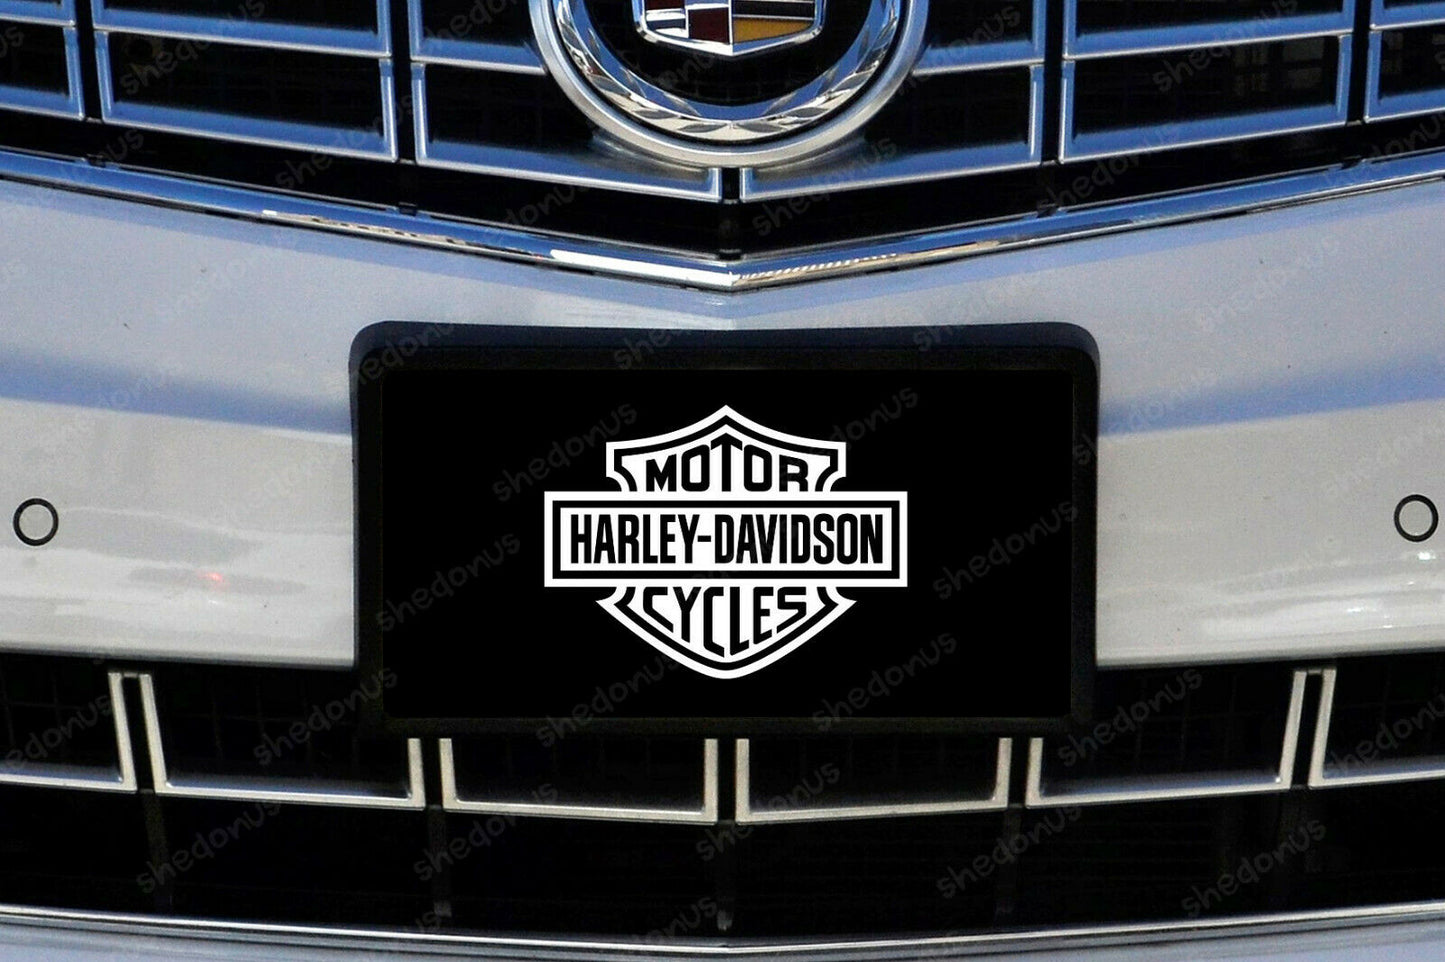 Harley Davidson License Plate Acrylic Any Car Sportst Touring Motorcycle